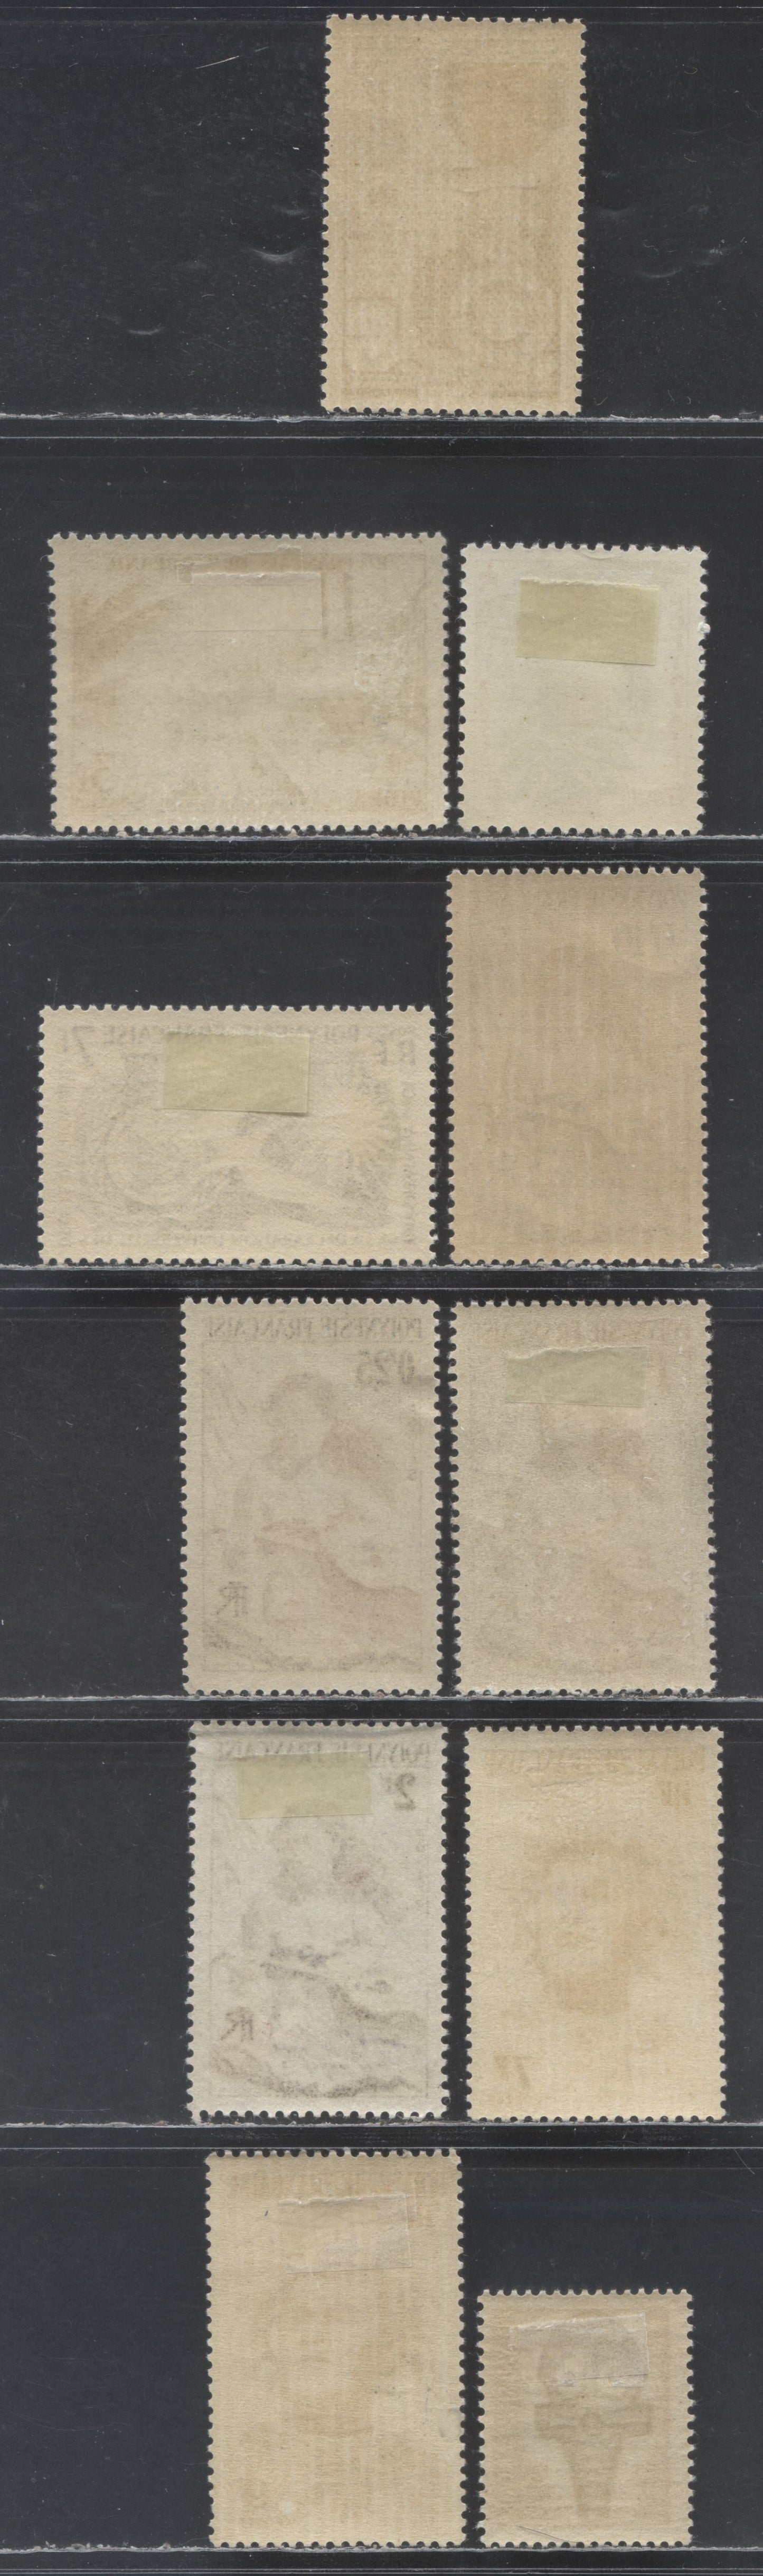 Lot 6 French Polynesia SC#179/J30 1952-1958 Military Medal - Postage Dues, 11 VFNH & OG Singles, Click on Listing to See ALL Pictures, Estimated Value $25